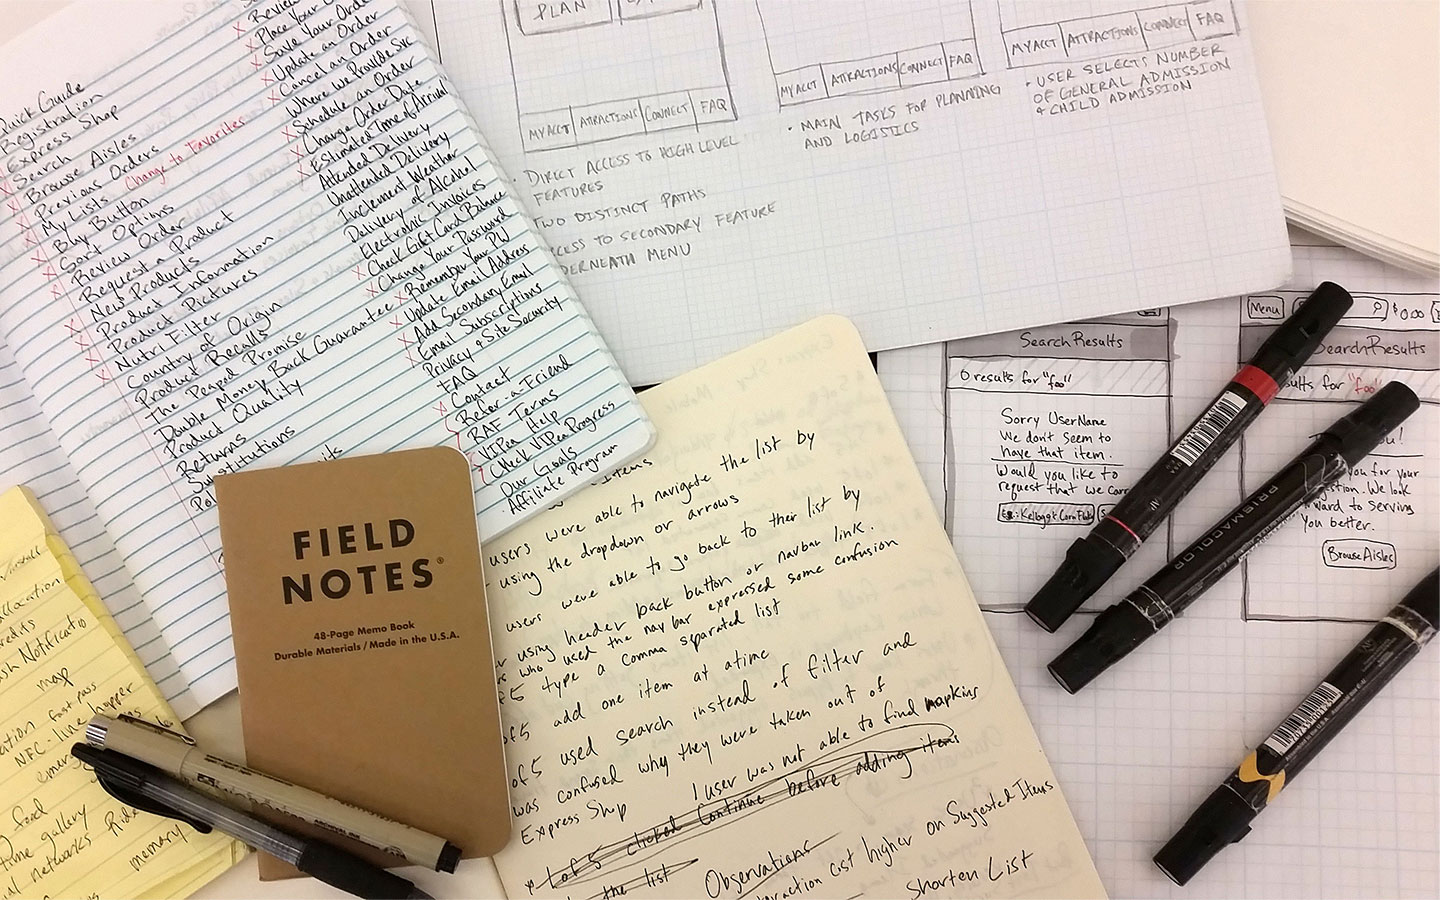 Image of sketches and notes.